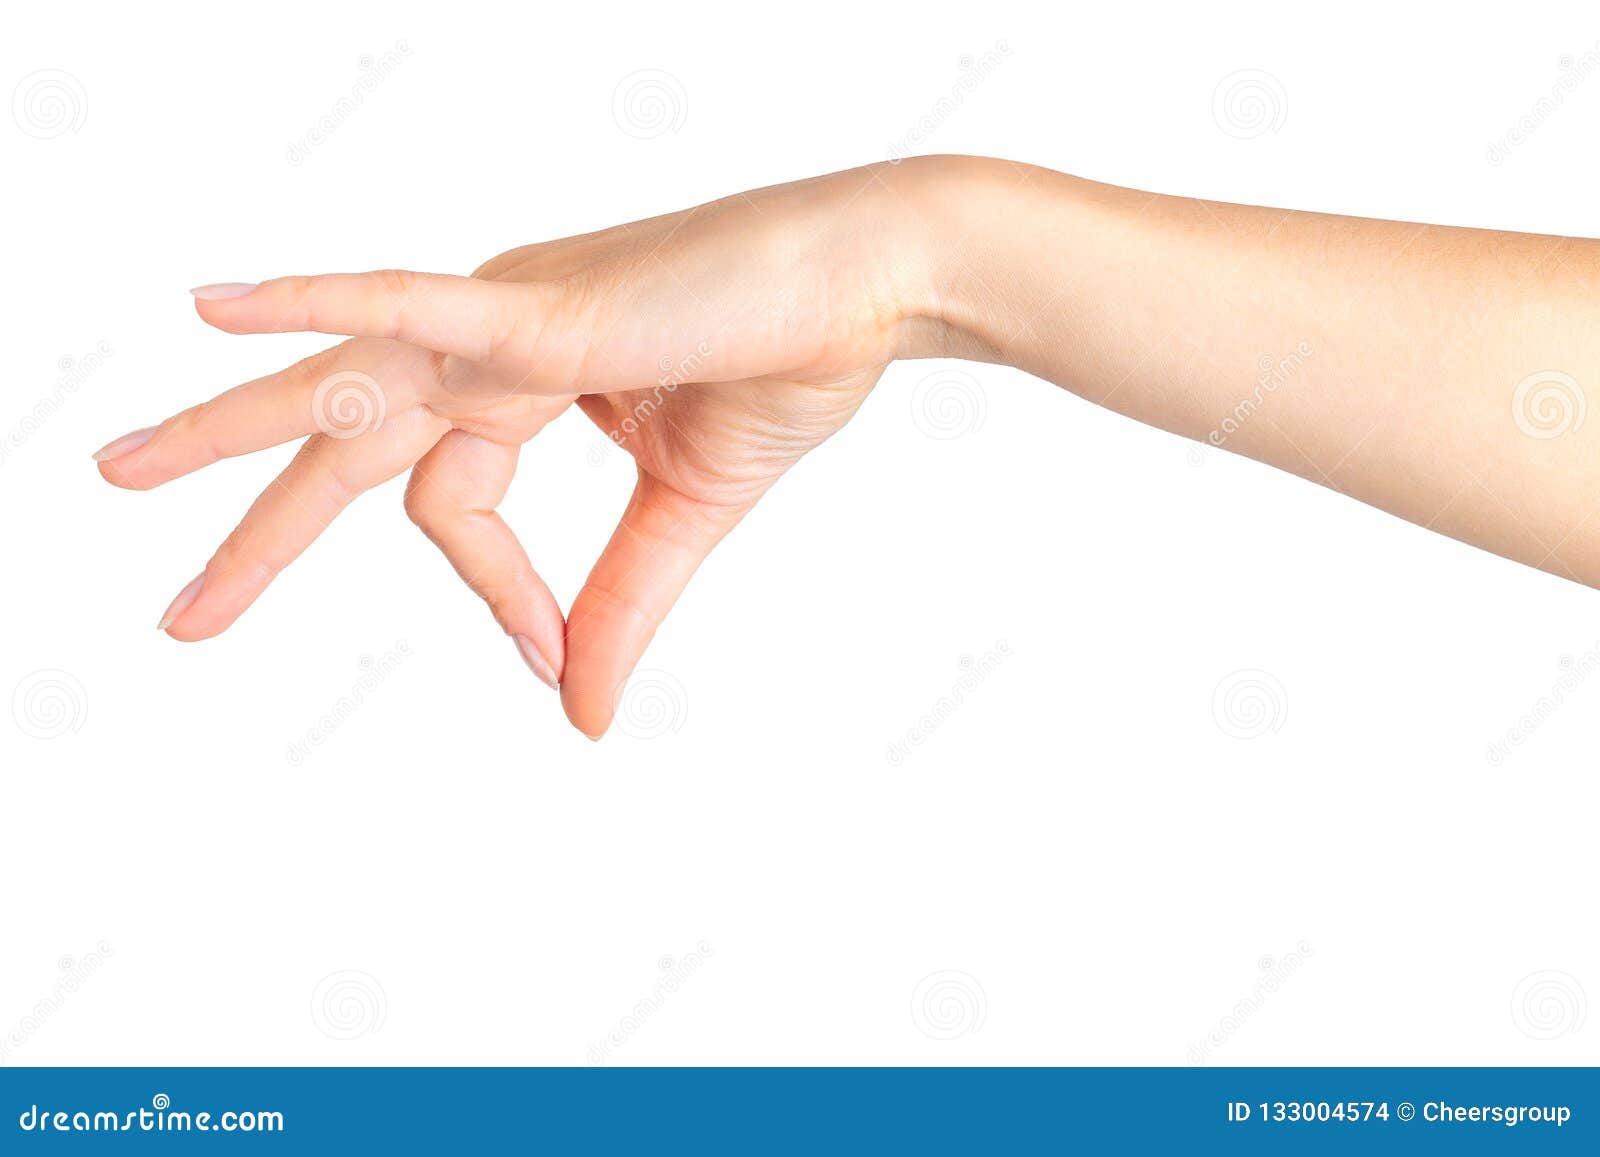 Two Hands Partnership Hand Poses American Stock Photo 313828724 |  Shutterstock